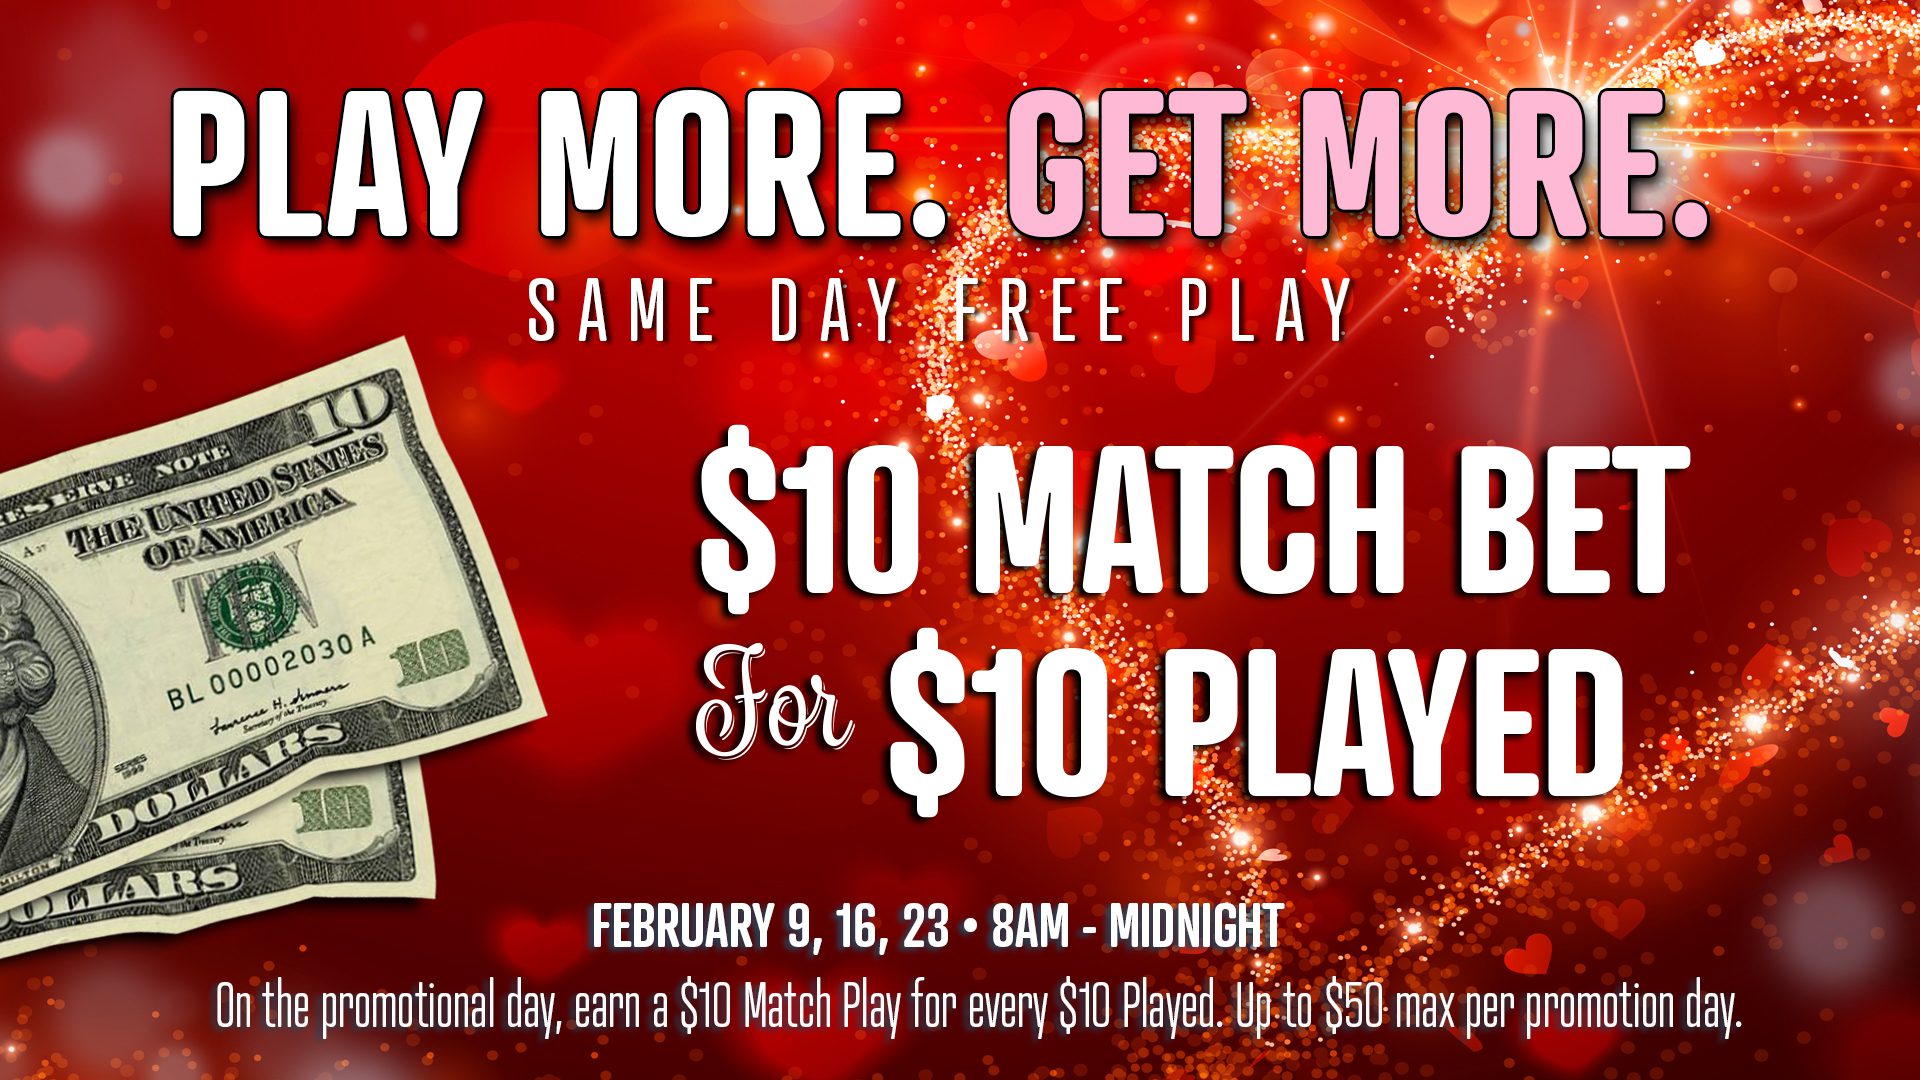 Promotional casino advertisement offering a $10 match bet for every $10 played, with specific dates and times for the offer.